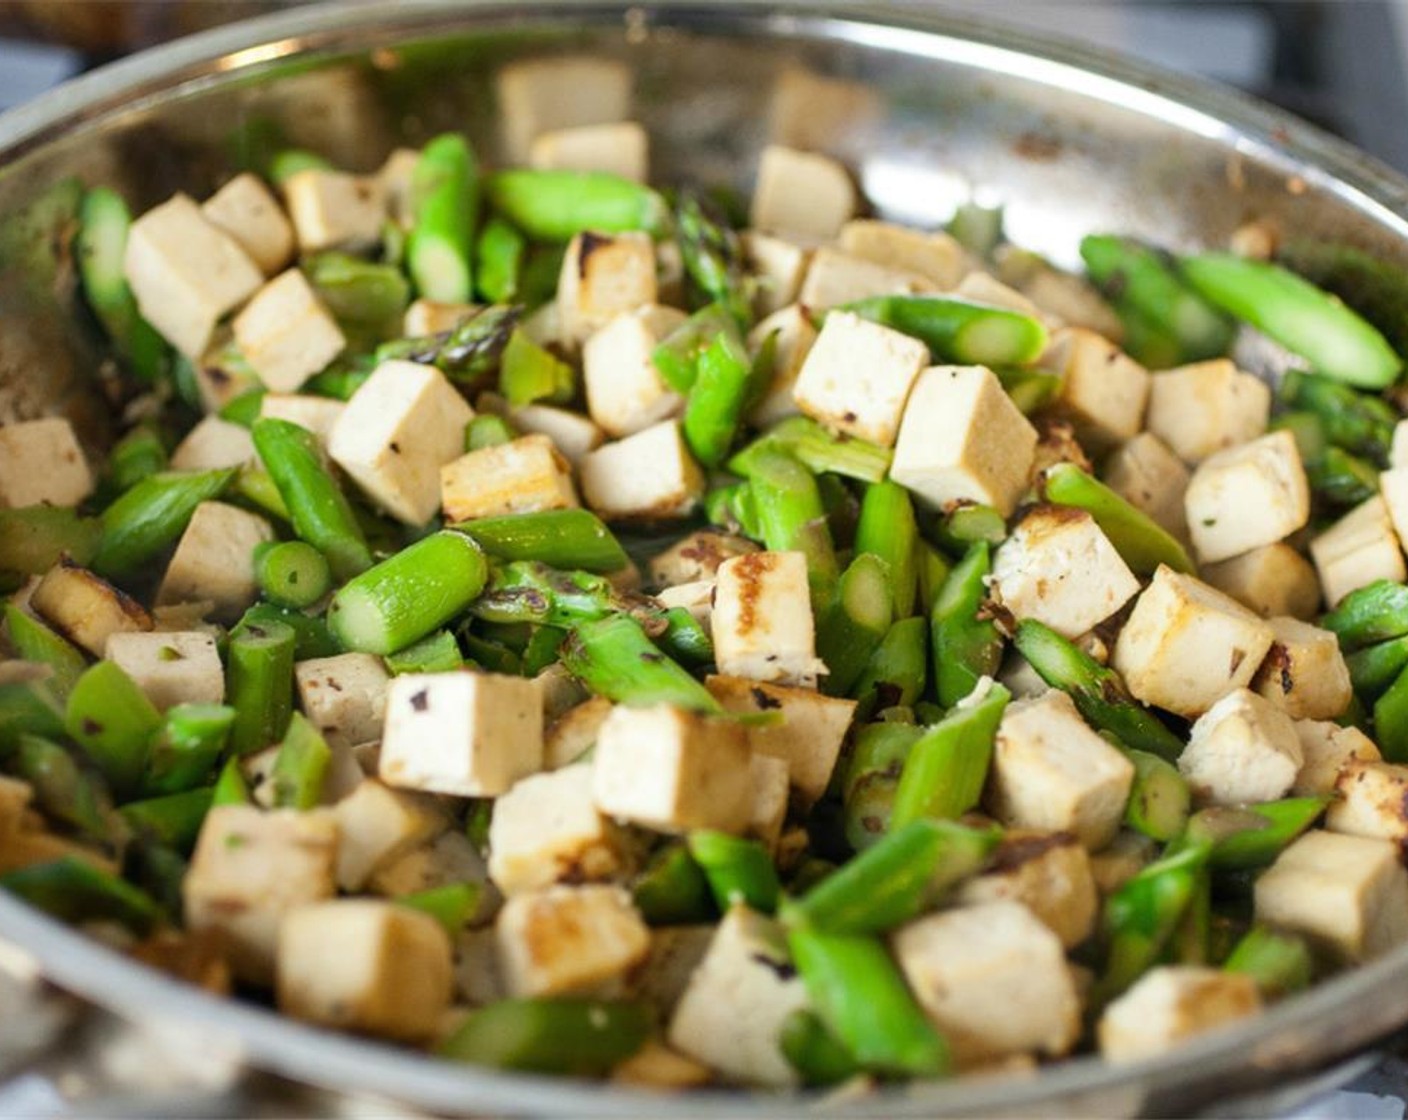 step 3 Meanwhile, in a large saute pan, heat Sesame Oil (1 tsp) over low heat. Towel off residual wetness from the cubed tofu and asparagus and add to pan with the remaining ginger and Brown Sugar (1 Tbsp).